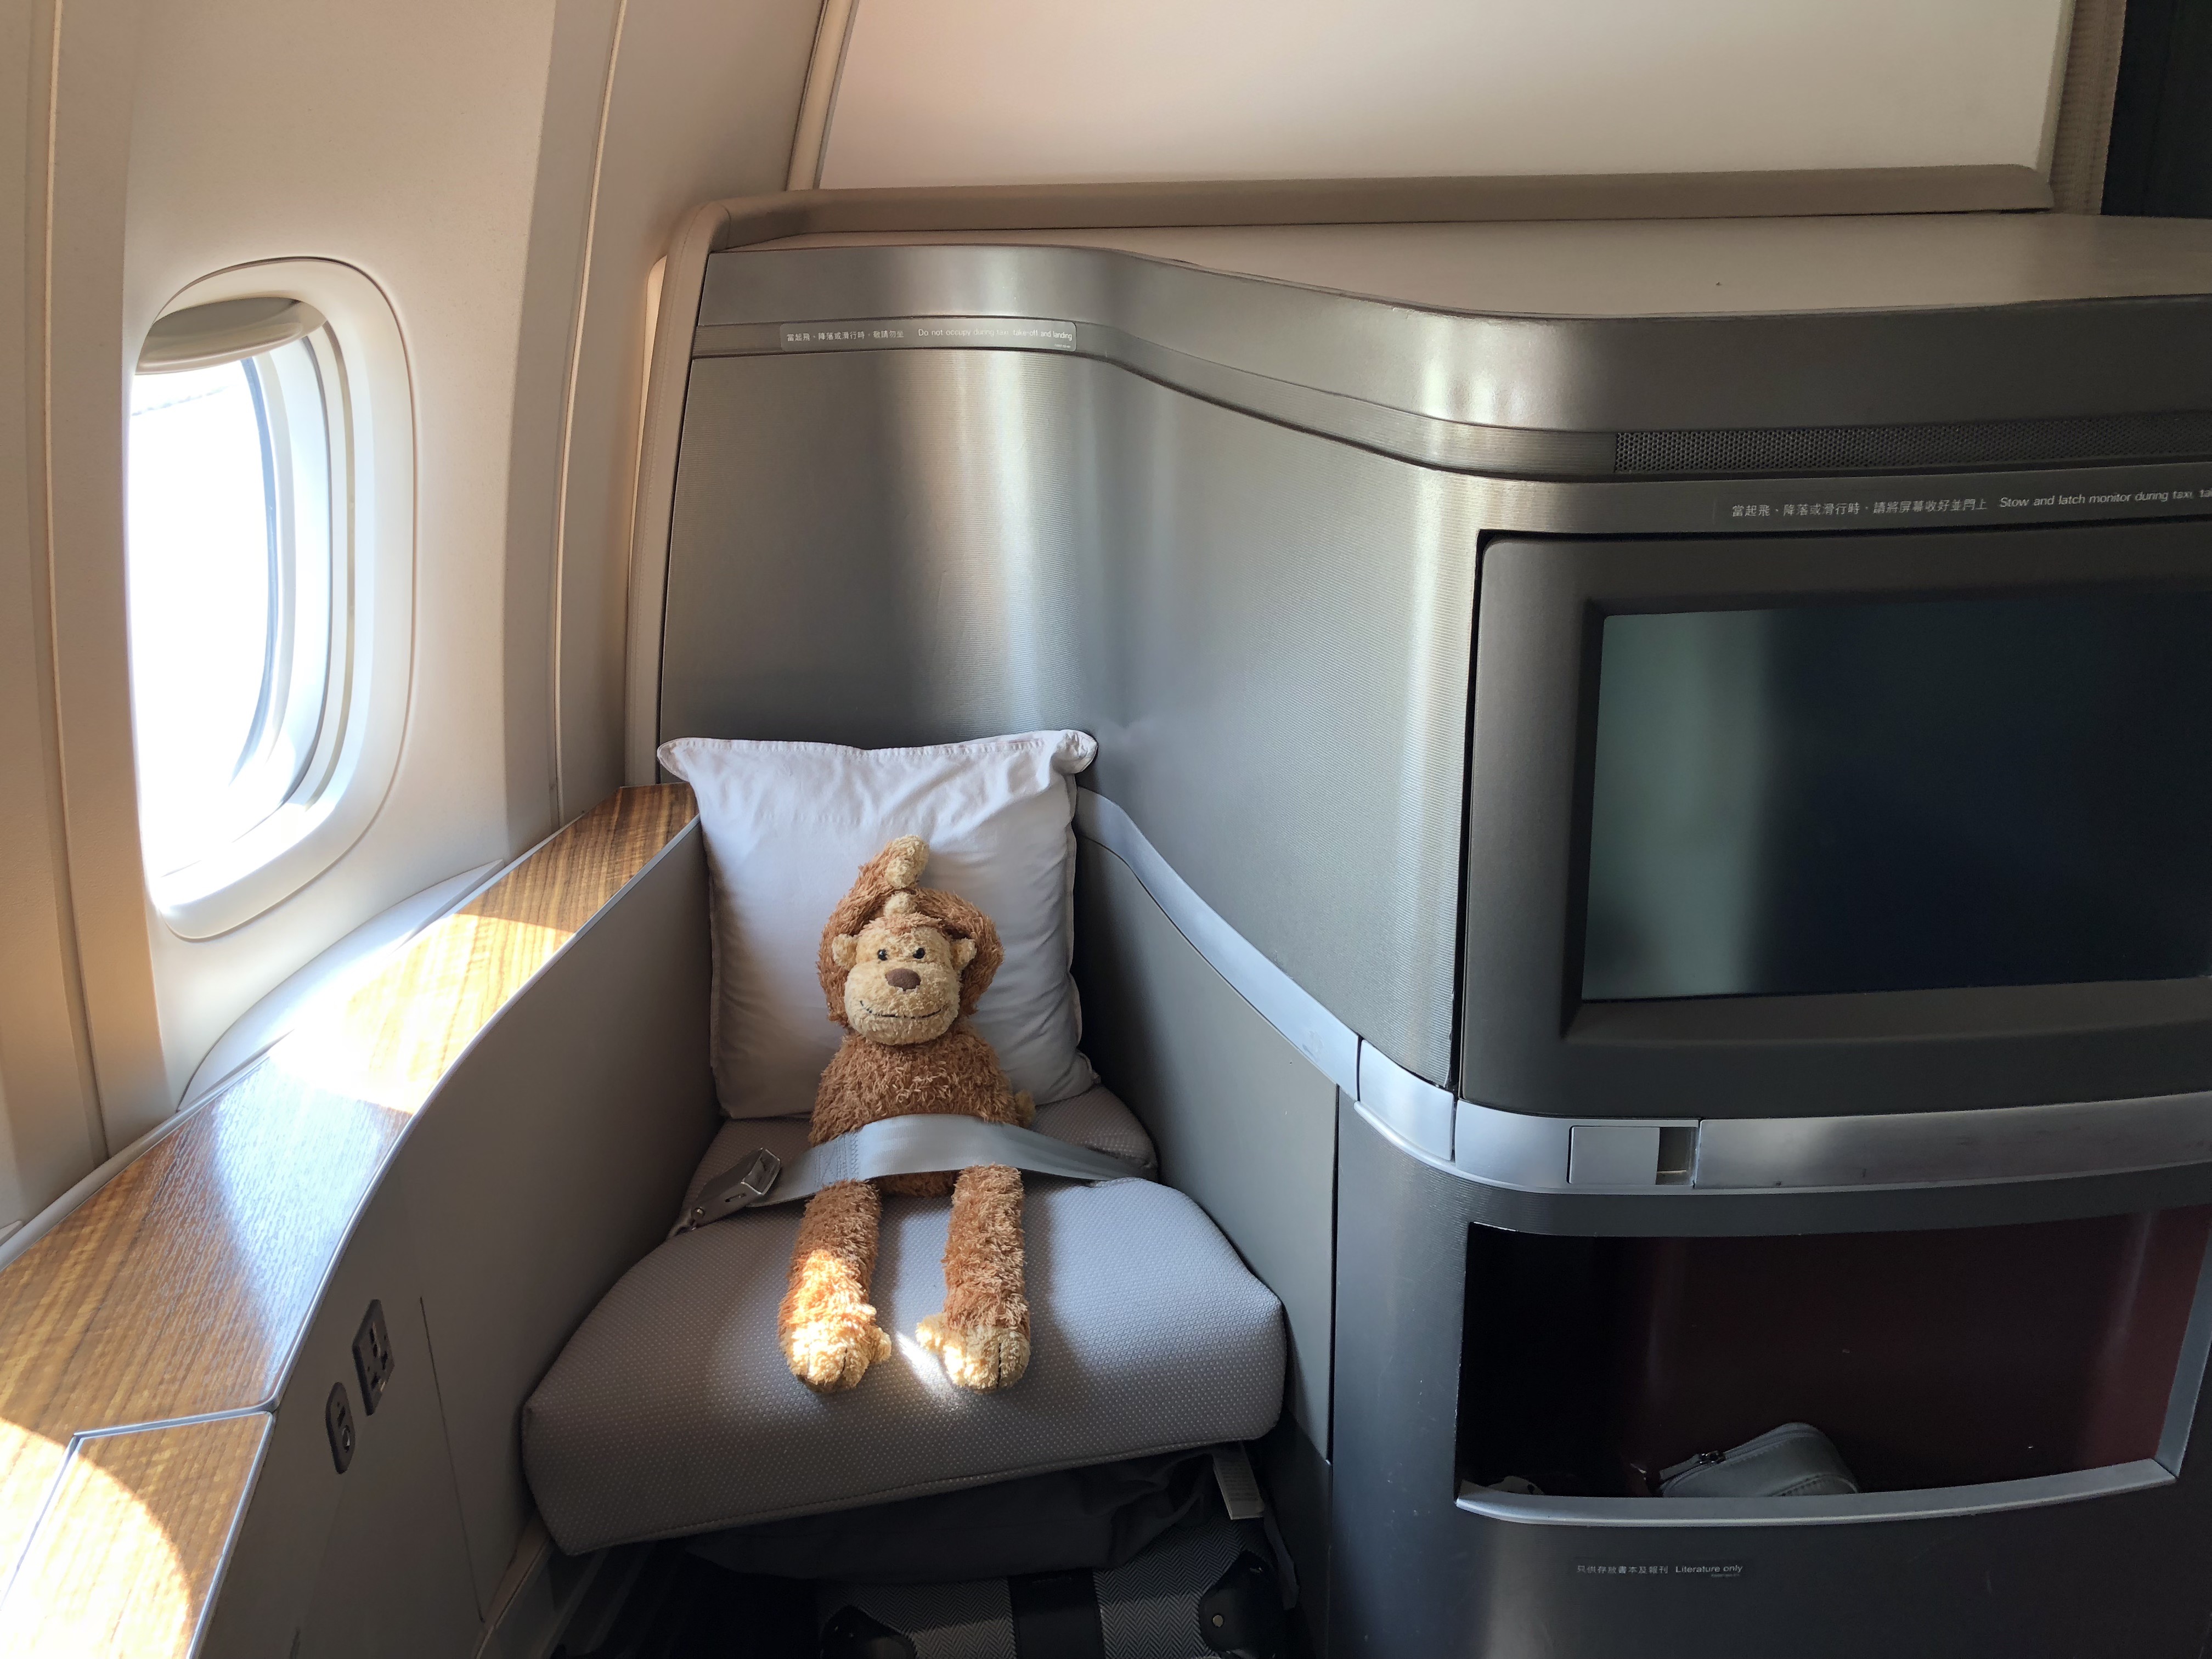 a stuffed animal on a seat in a plane